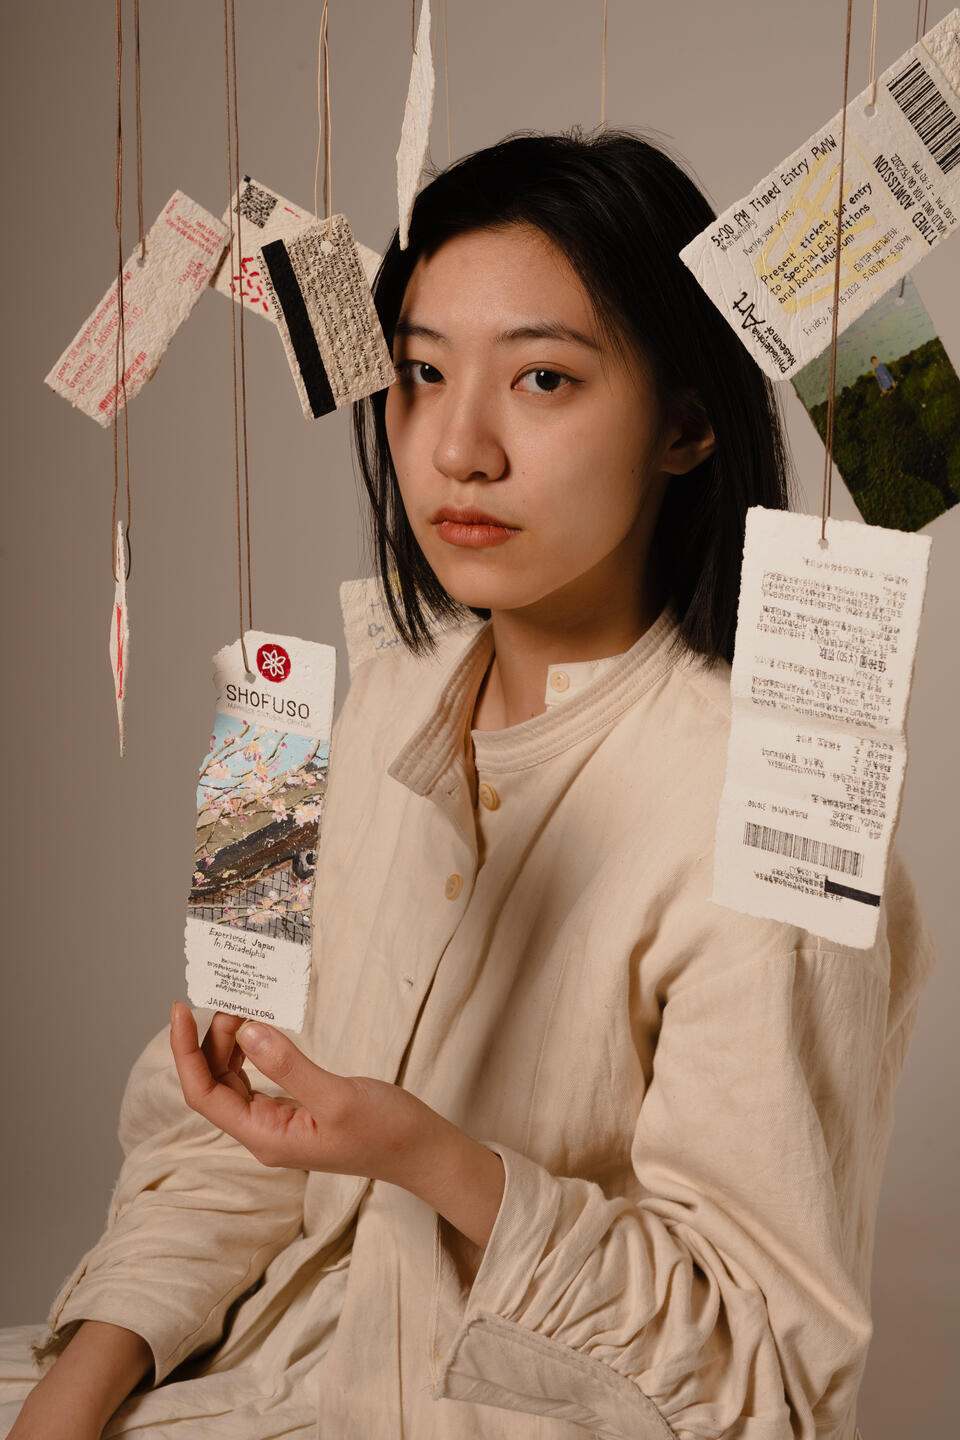 A girl wearing a cream dress surrounded by suspended tickets painted on paper mache. Her one hand is touching one ticket, eyes looking at the camera. 